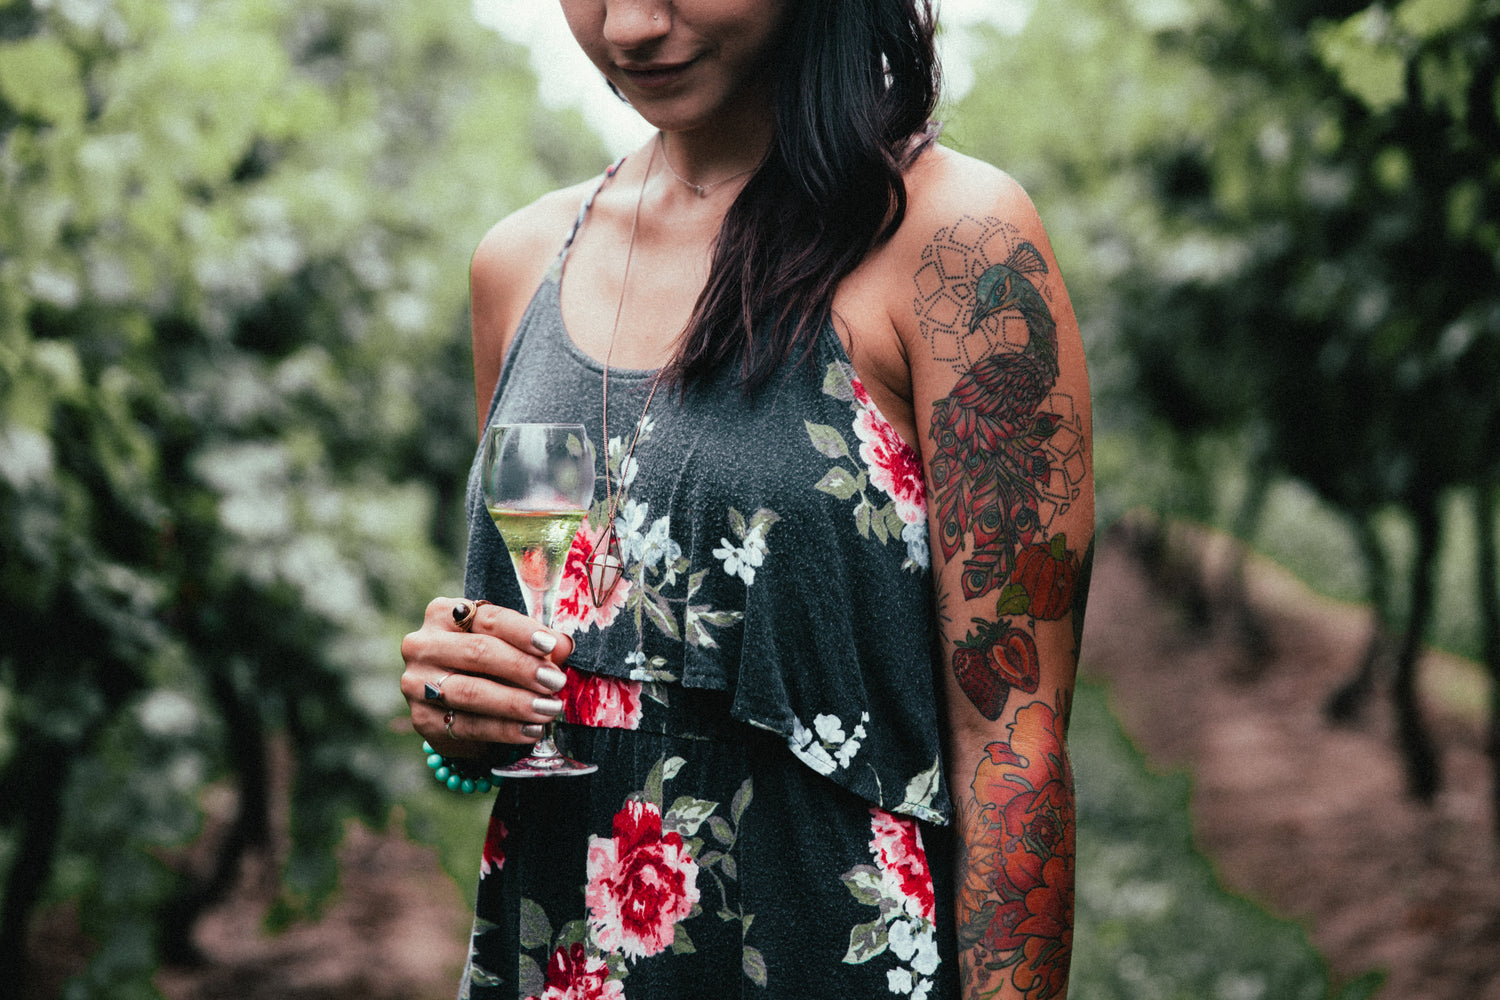 Woman with tattoos holding a glass of wine outdoors